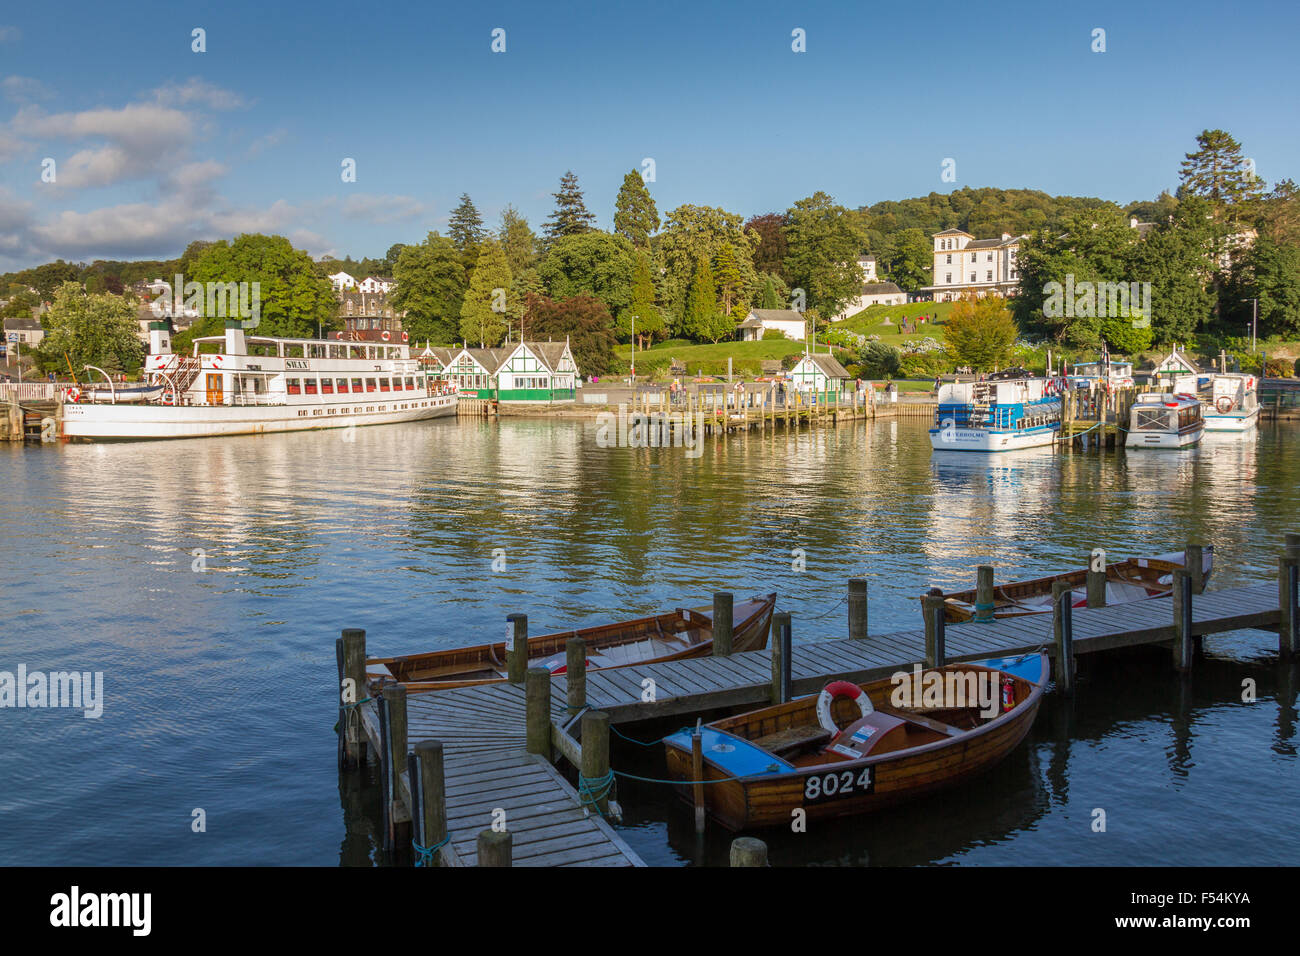 Bowness-on-Windermere, United Kingdom - September 7, 2015: Afternoon photo of Bowness-on-Windermere harbor with wooden boats and Stock Photo